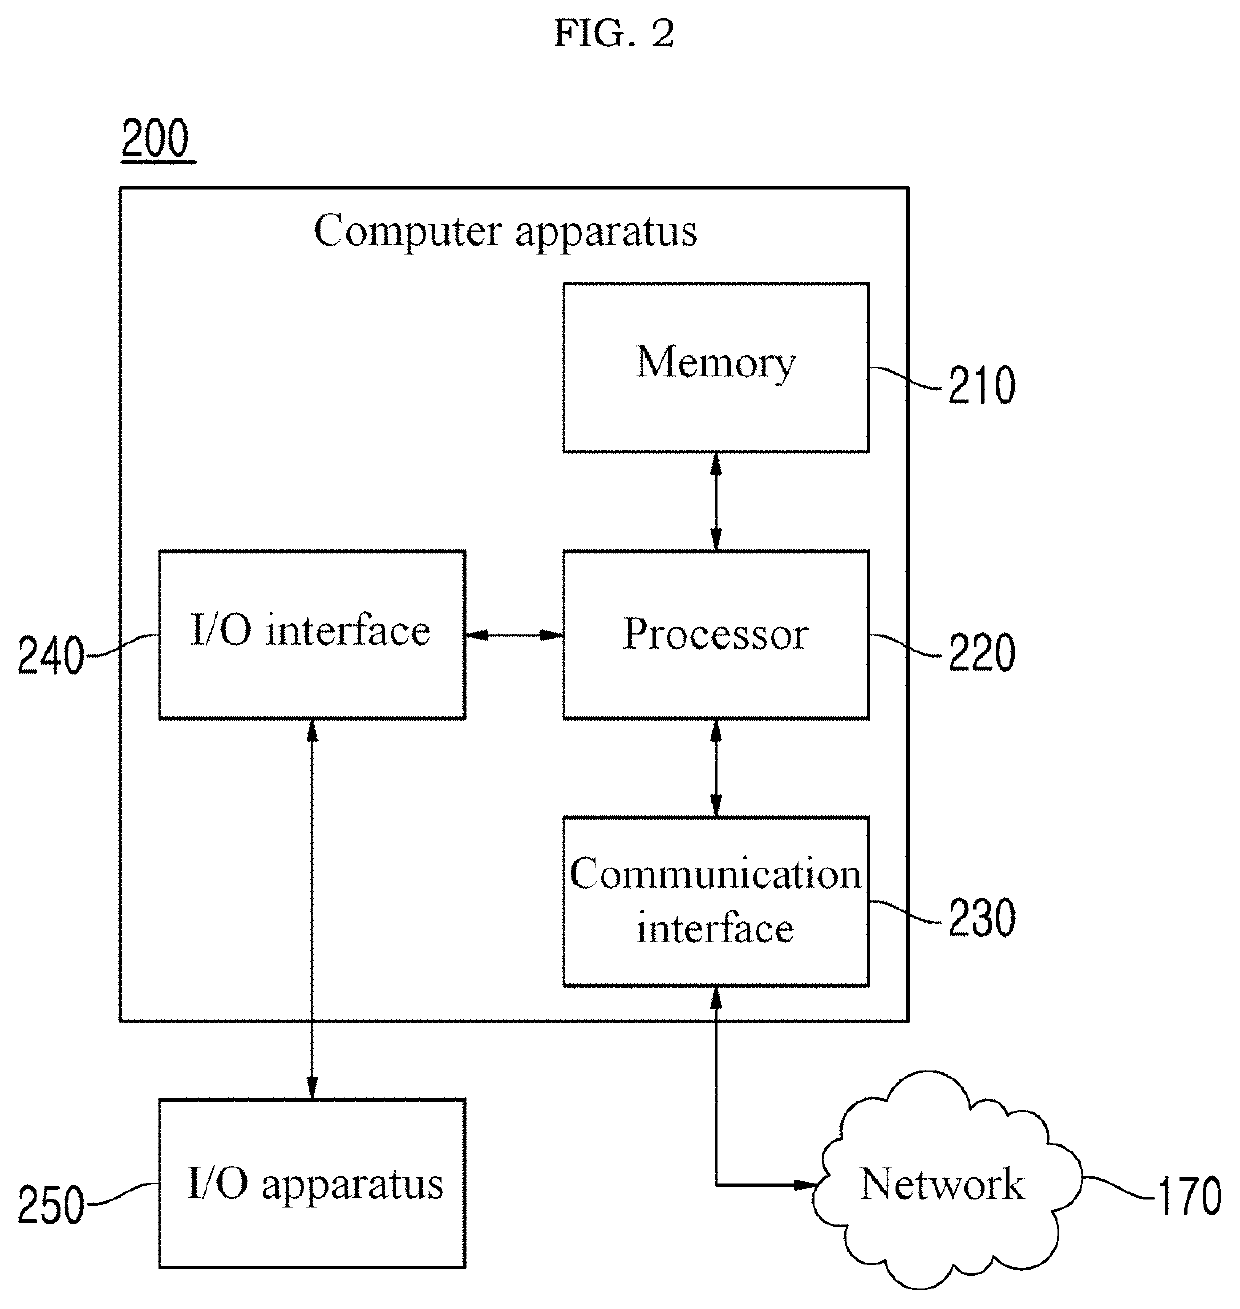 User context recognition in messaging service environment and interaction with messaging service based on user context recognition